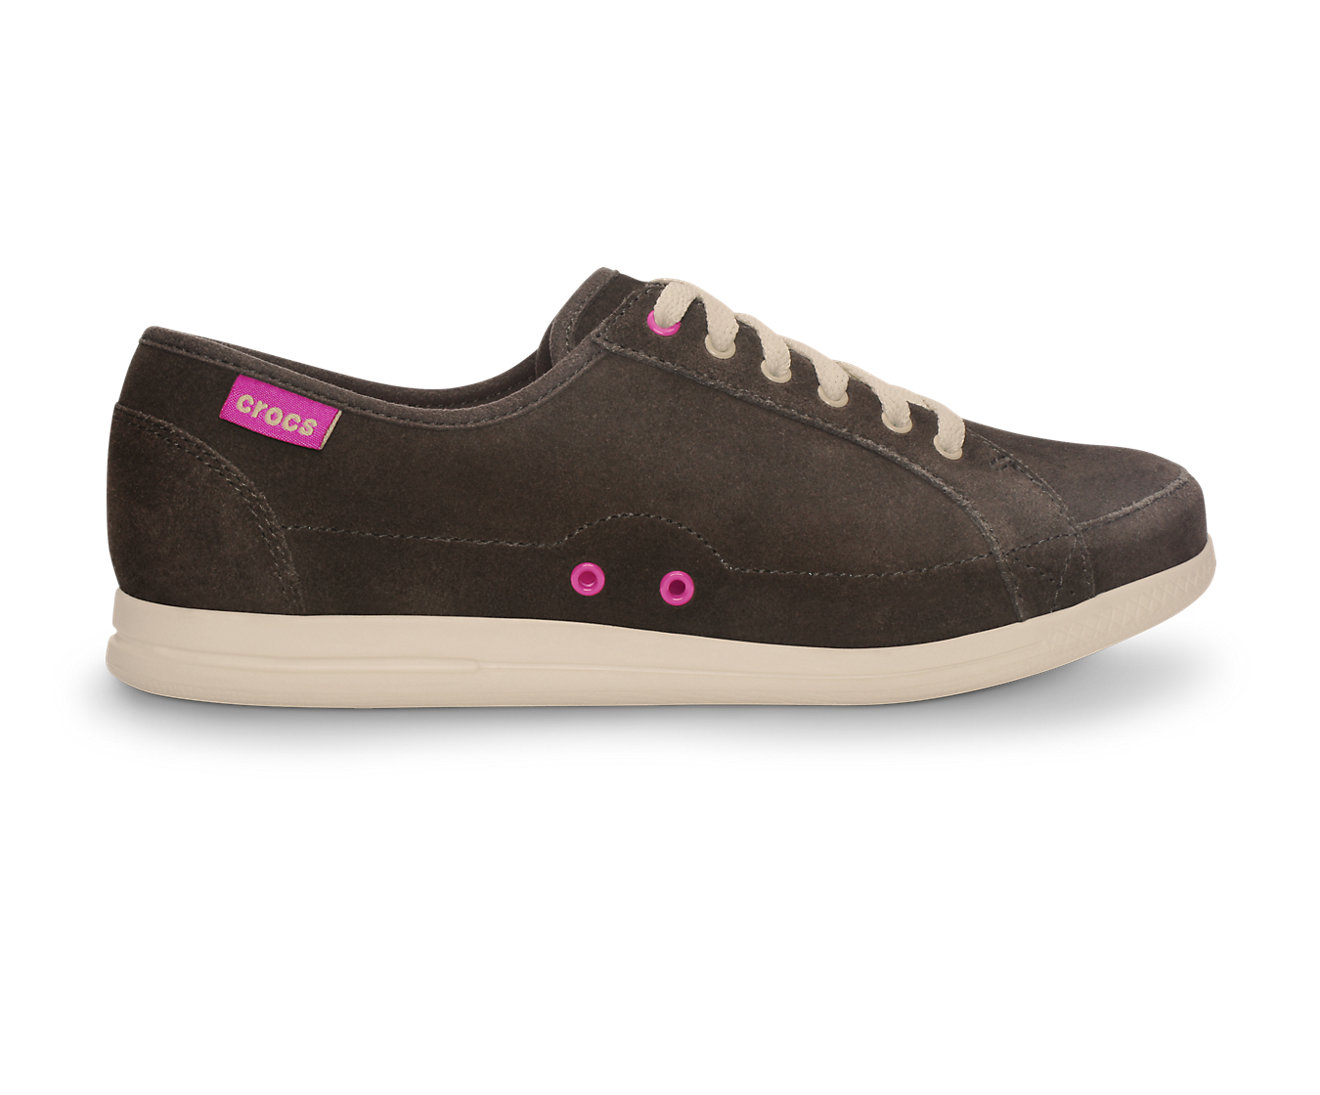 LoPro Suede Lace Up Sneaker